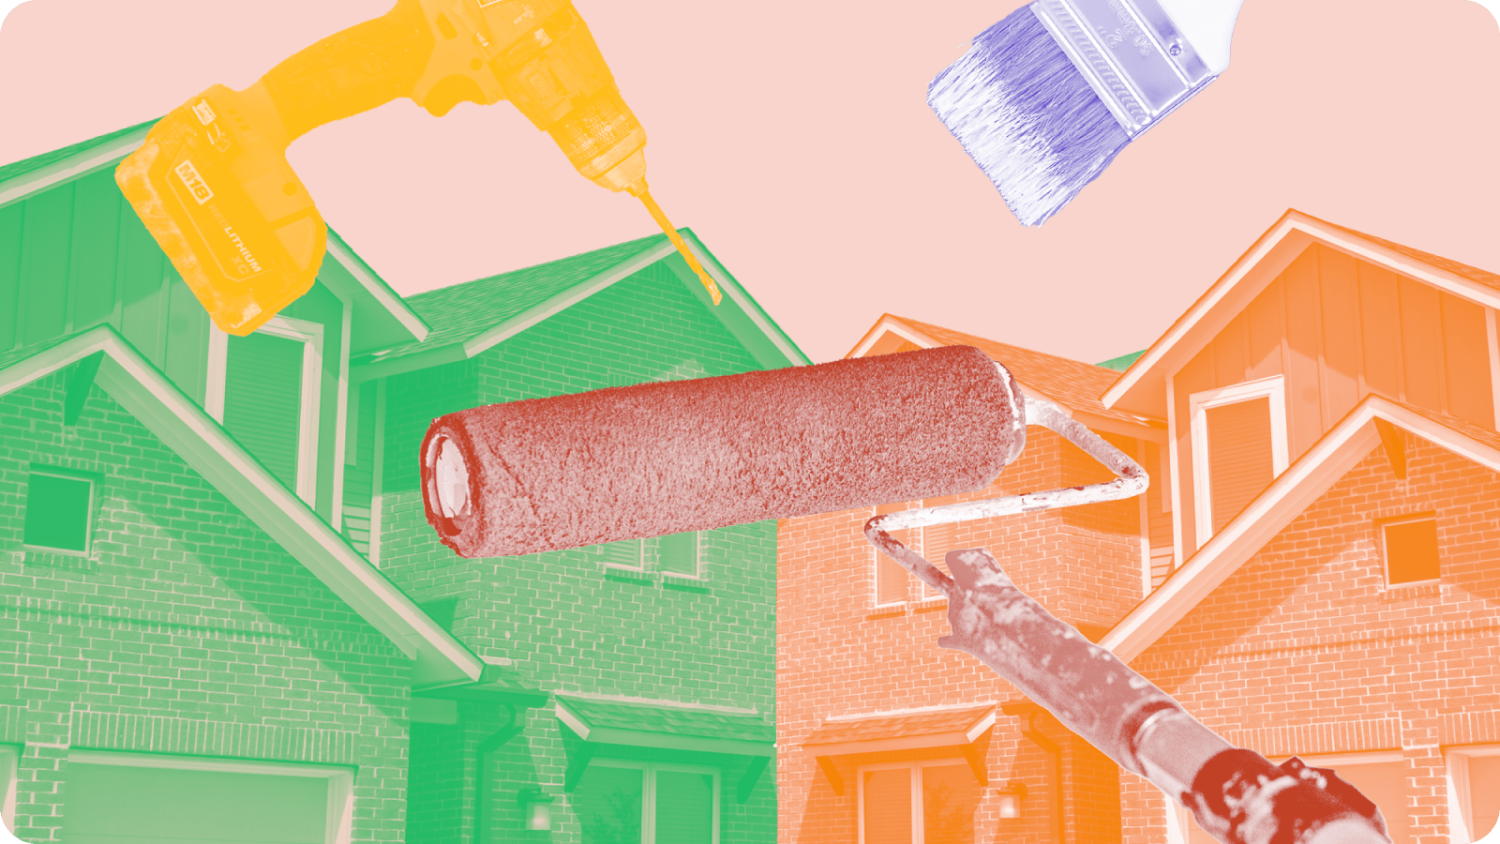 "Image of colored homes with paint brush, roller, and drill